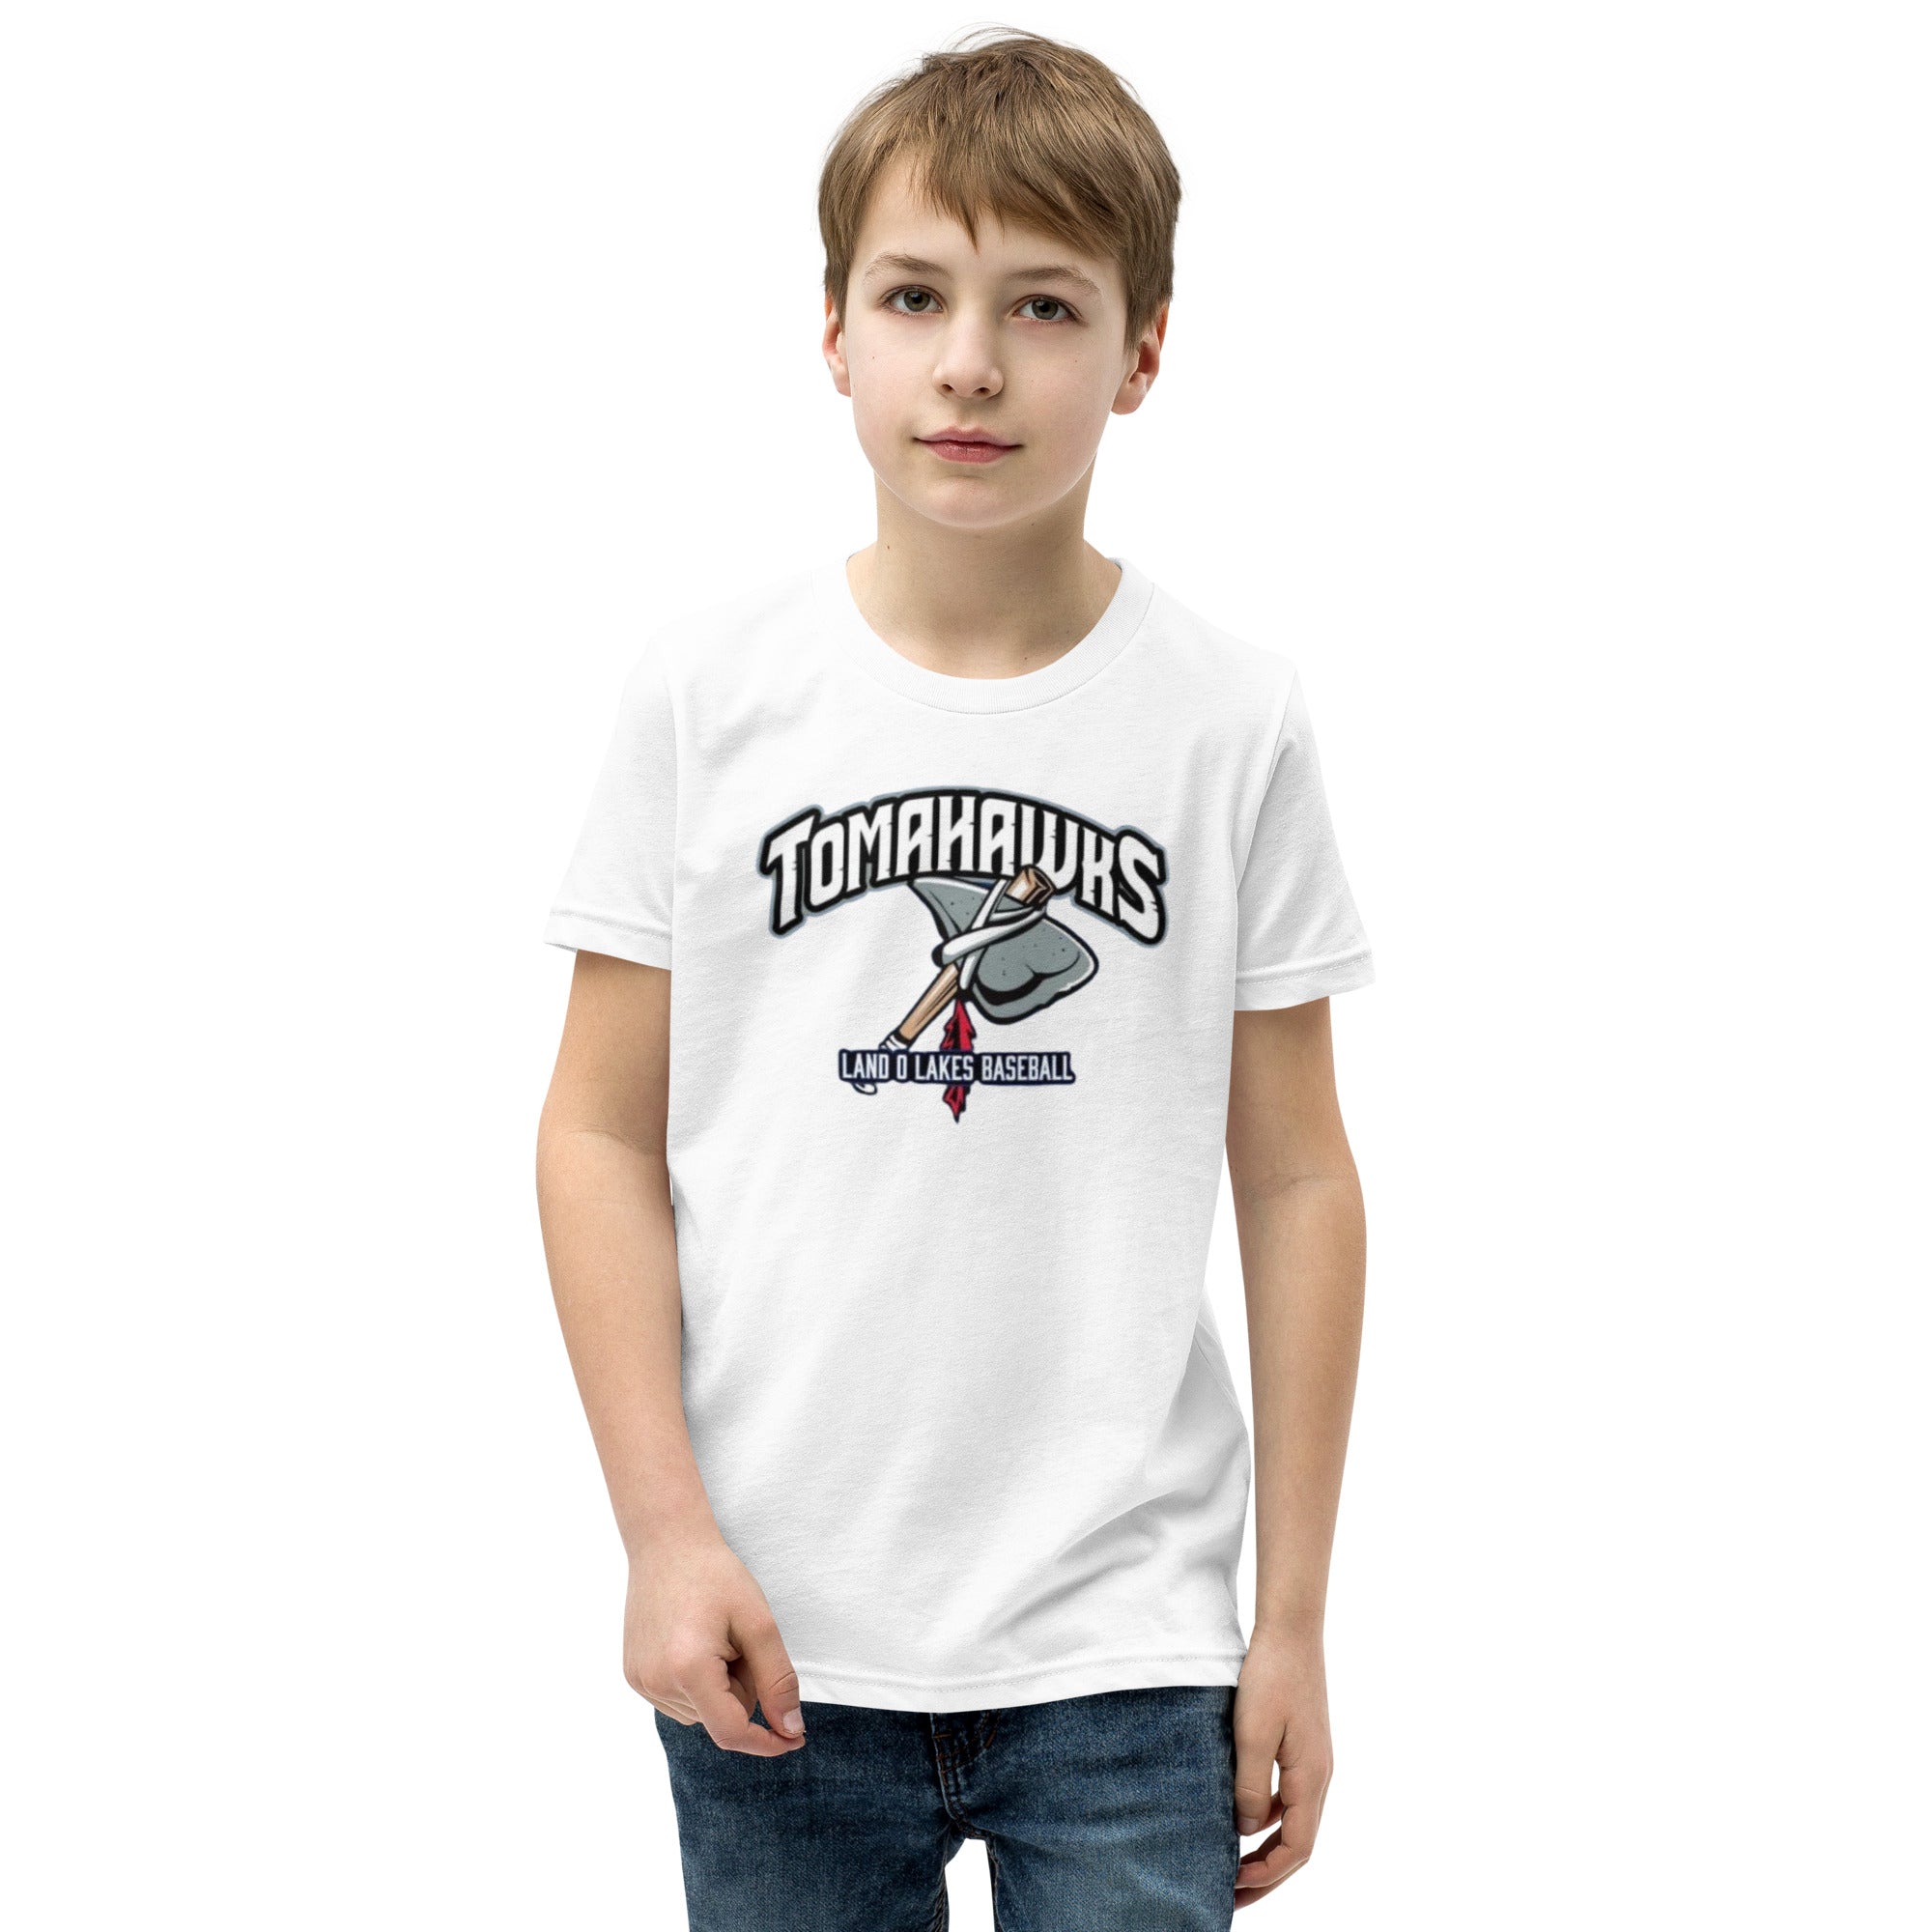 LOL Tomahawks Personalized Player Youth Short Sleeve T-Shirt